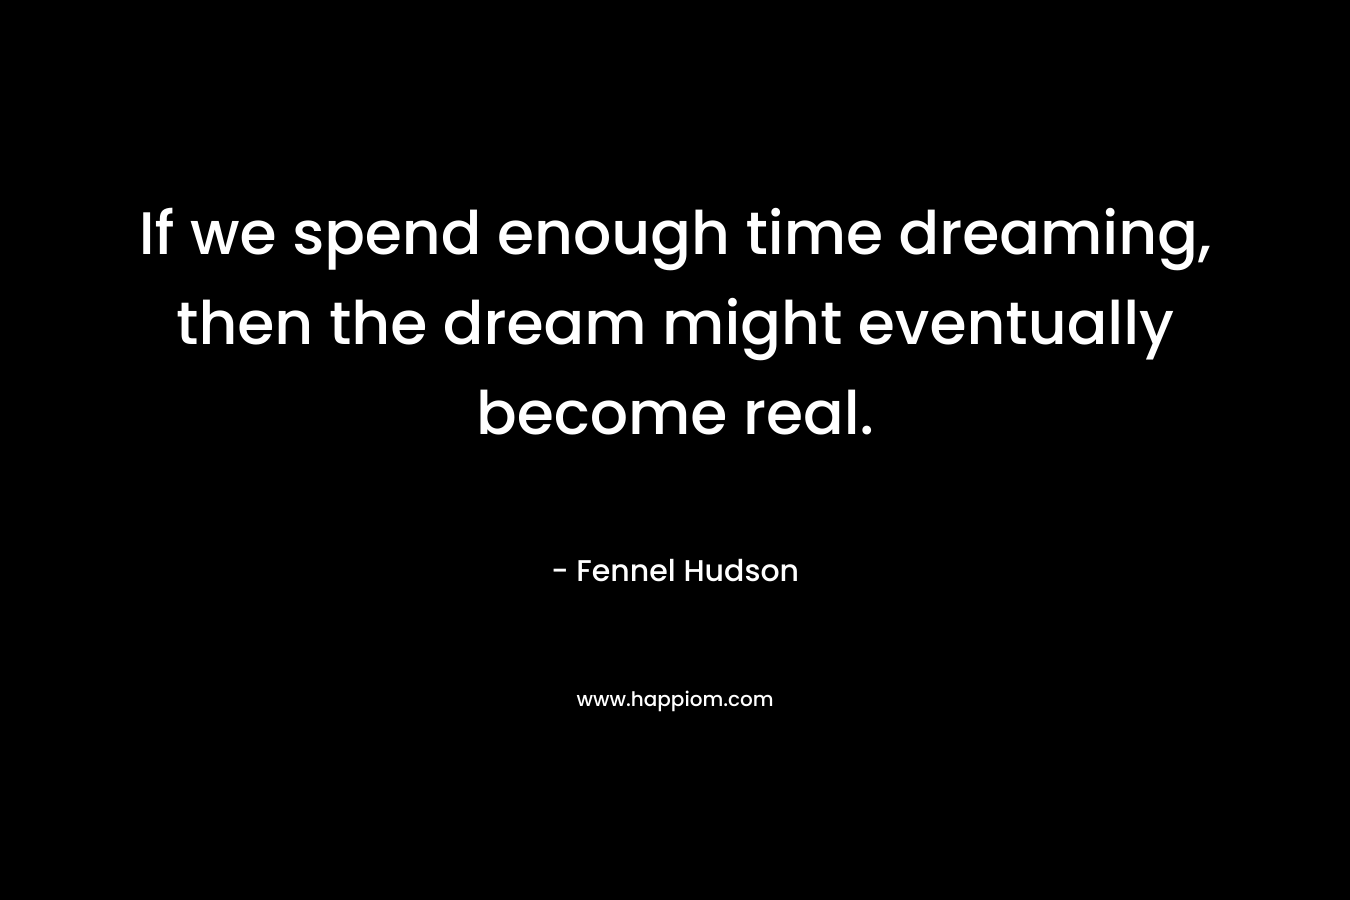 If we spend enough time dreaming, then the dream might eventually become real.